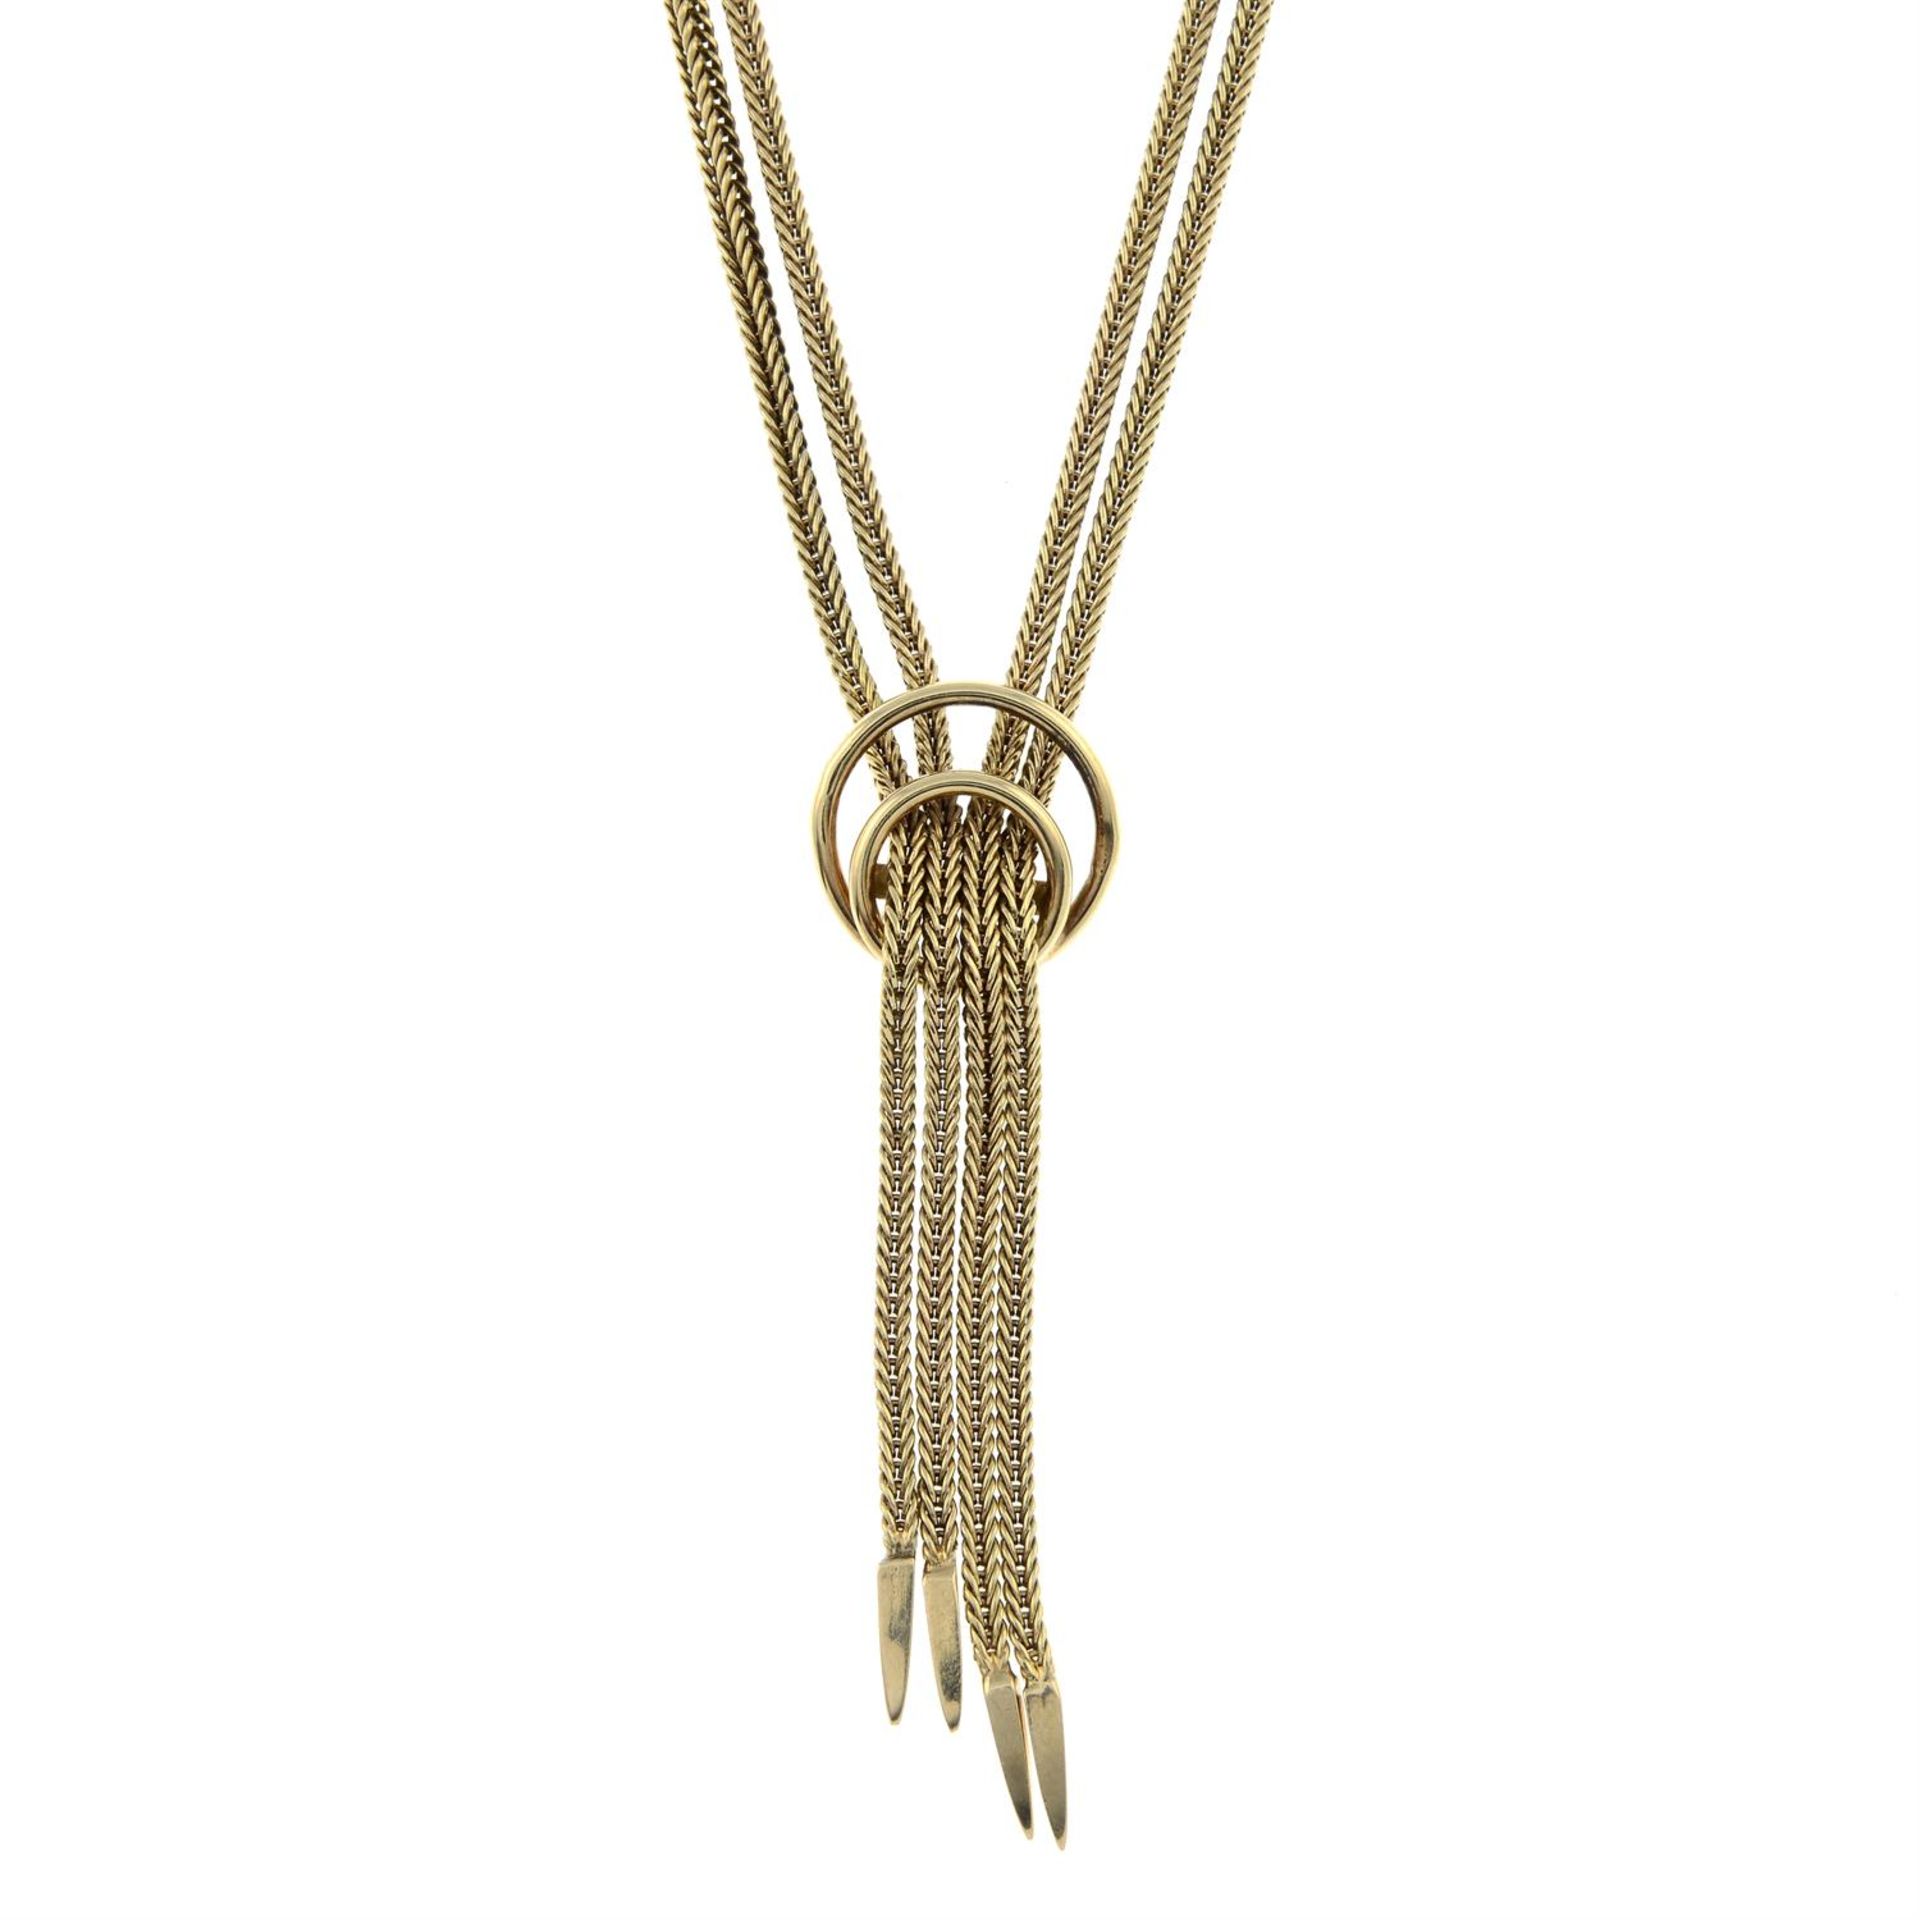 A 9ct gold herring-bone link necklace.